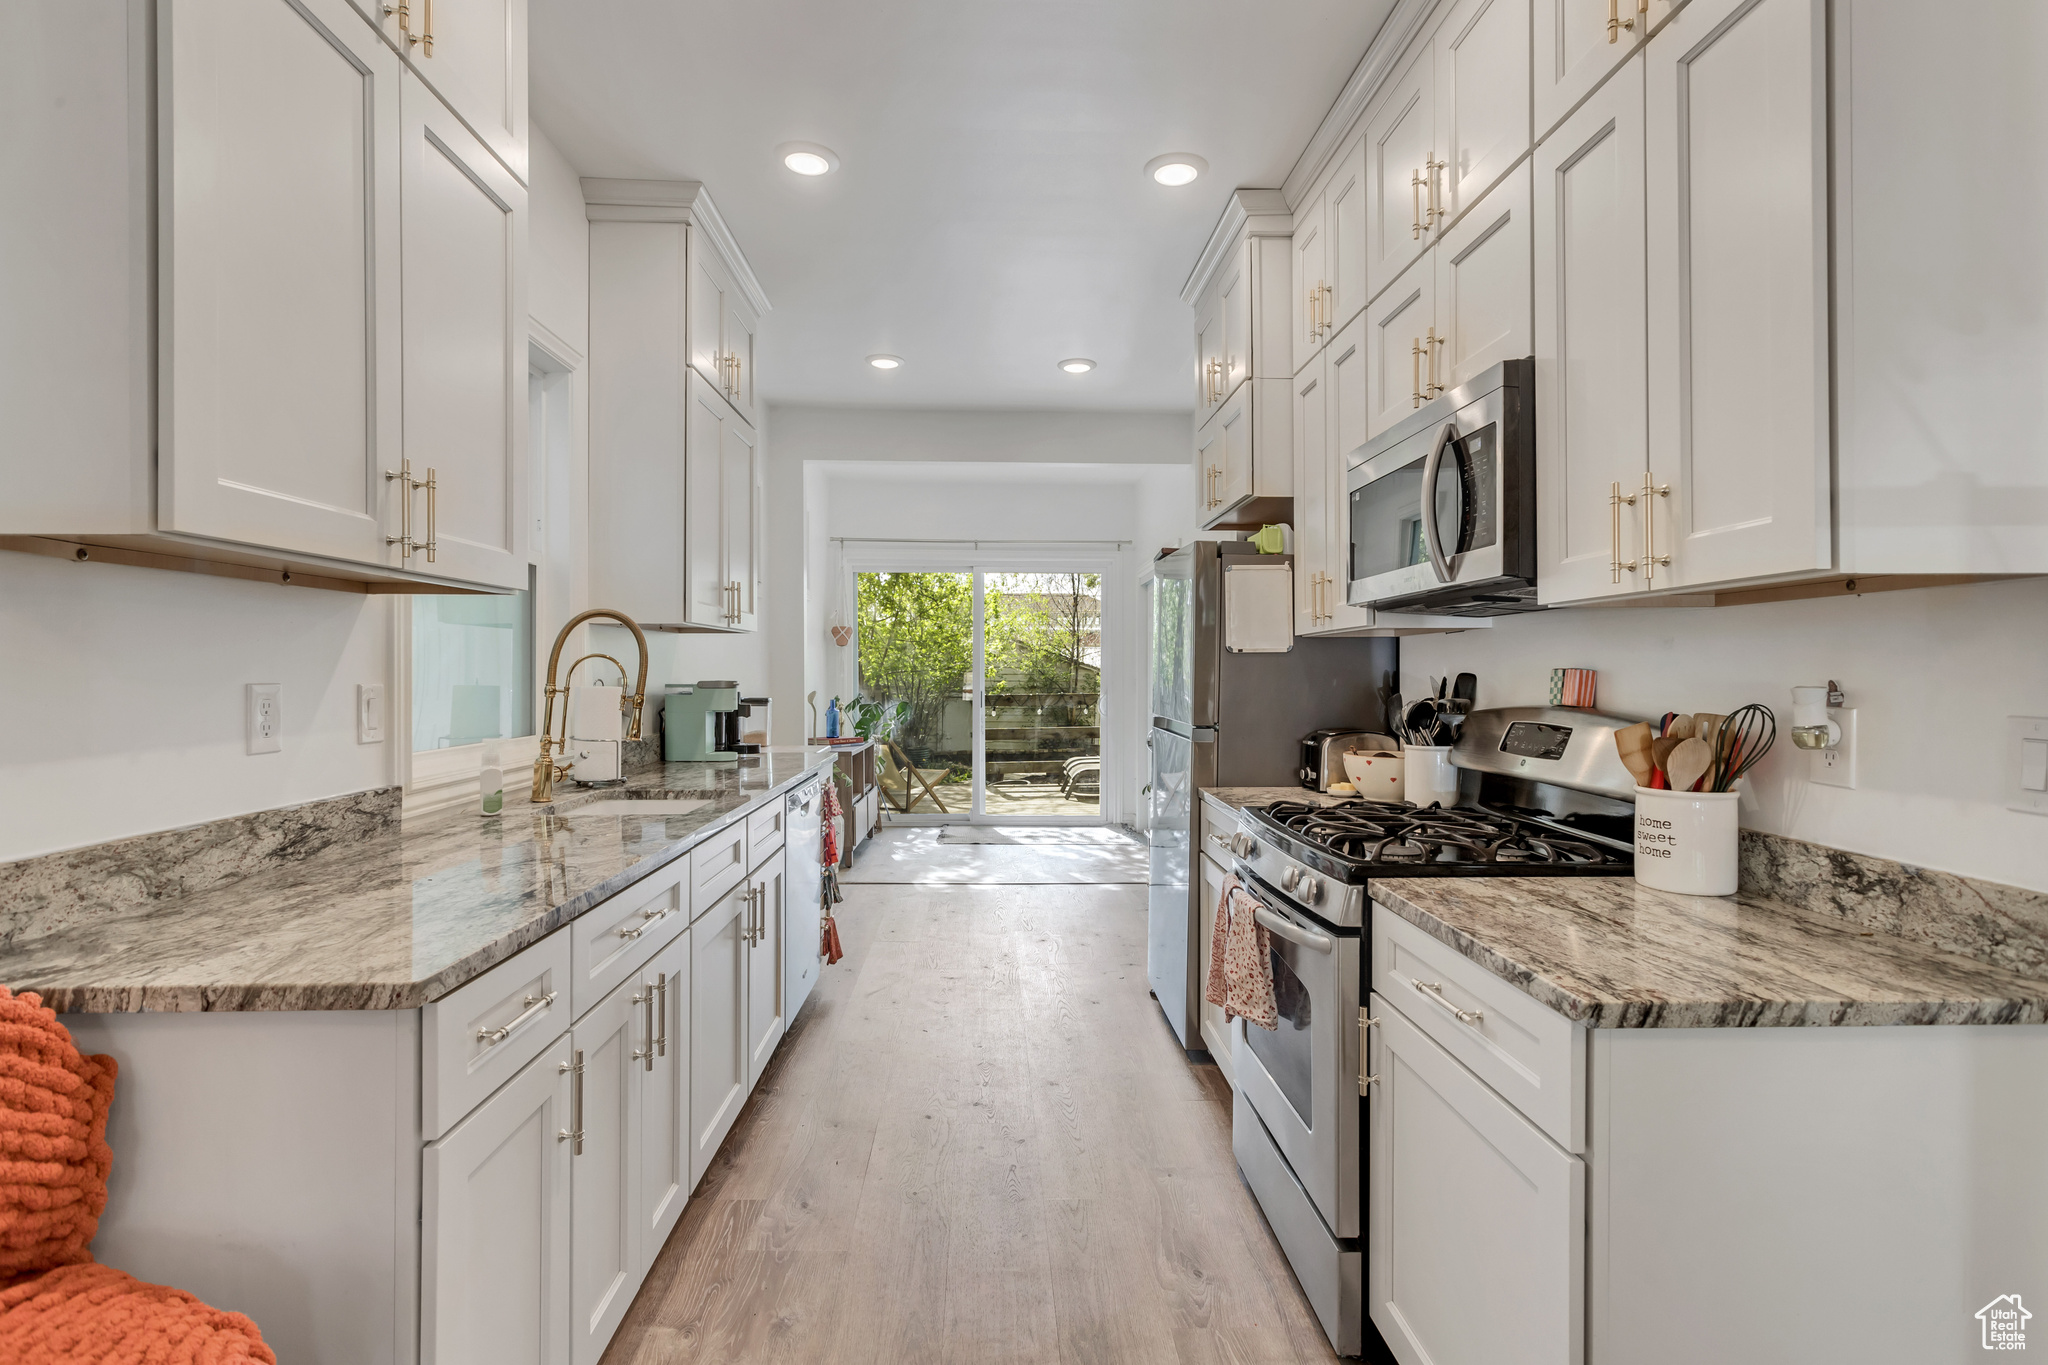 The beautifully remodeled kitchen boasts stainless stainless steel appliances and a gas range